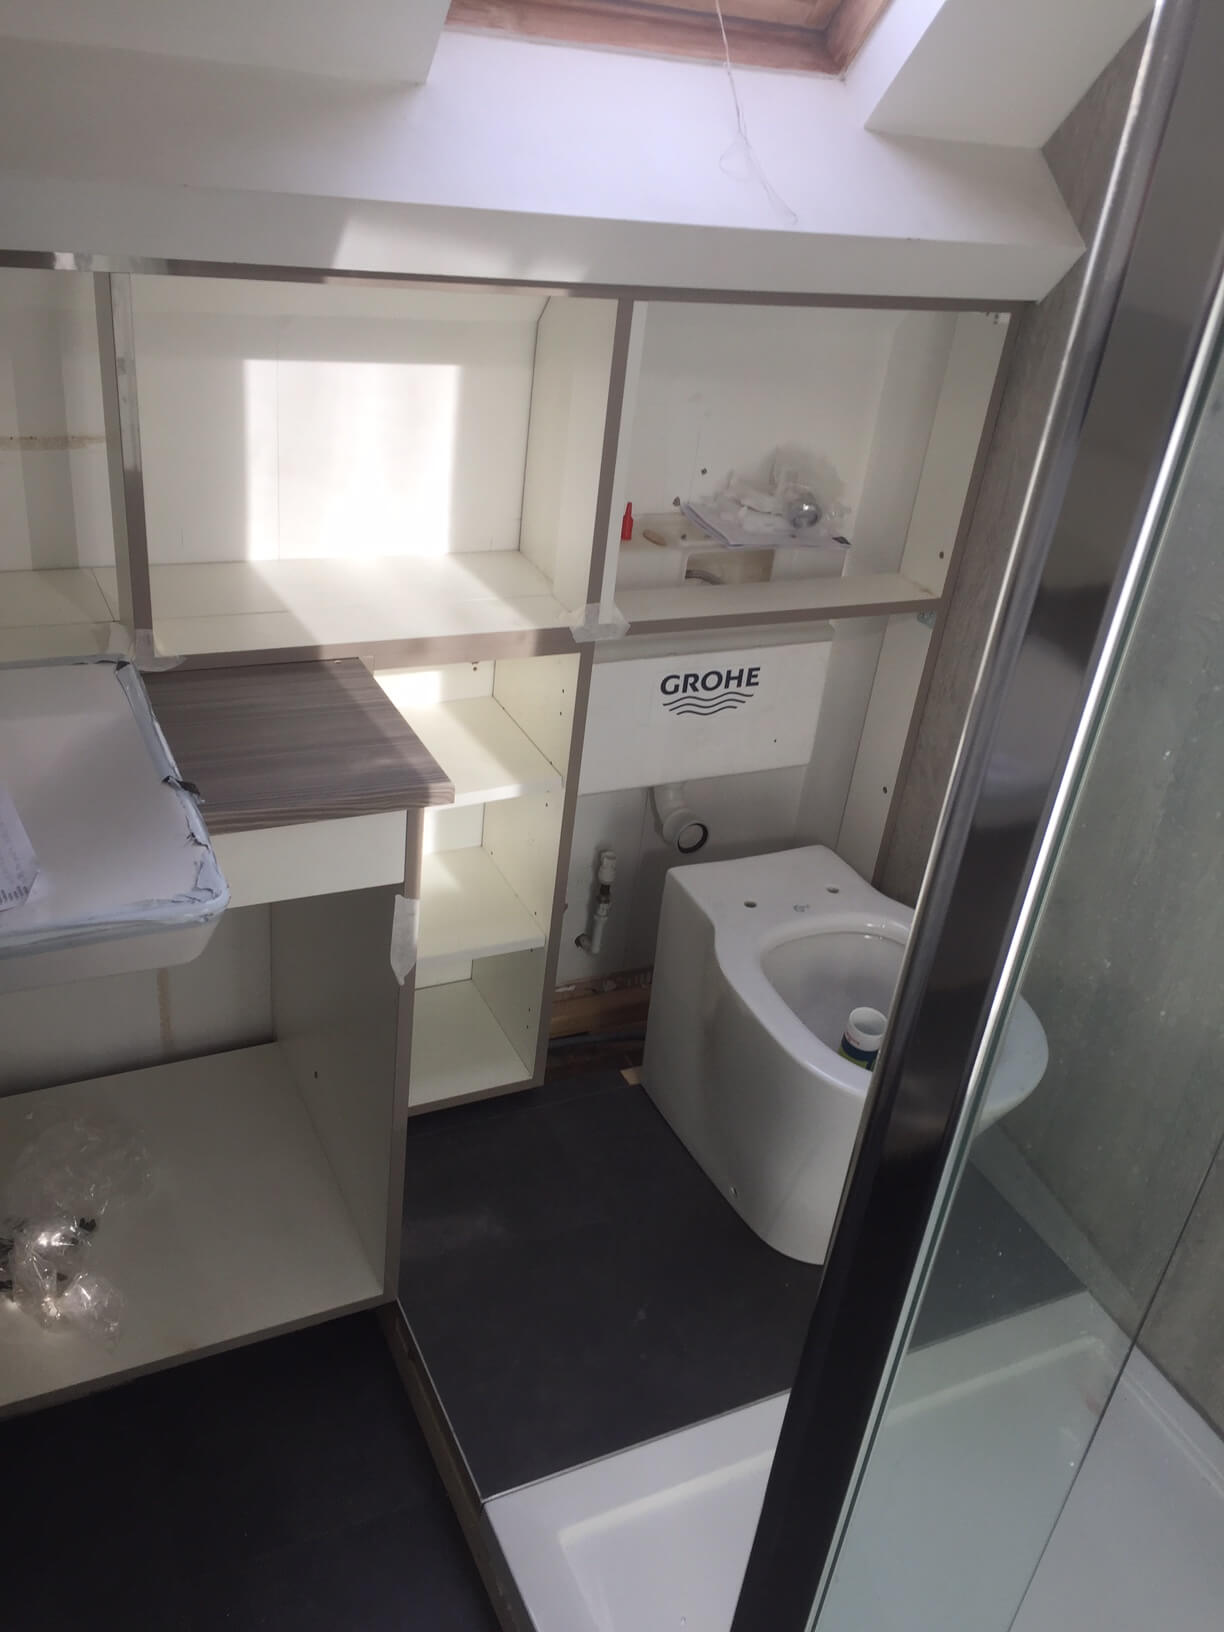 Vanity unit and toilet fitted